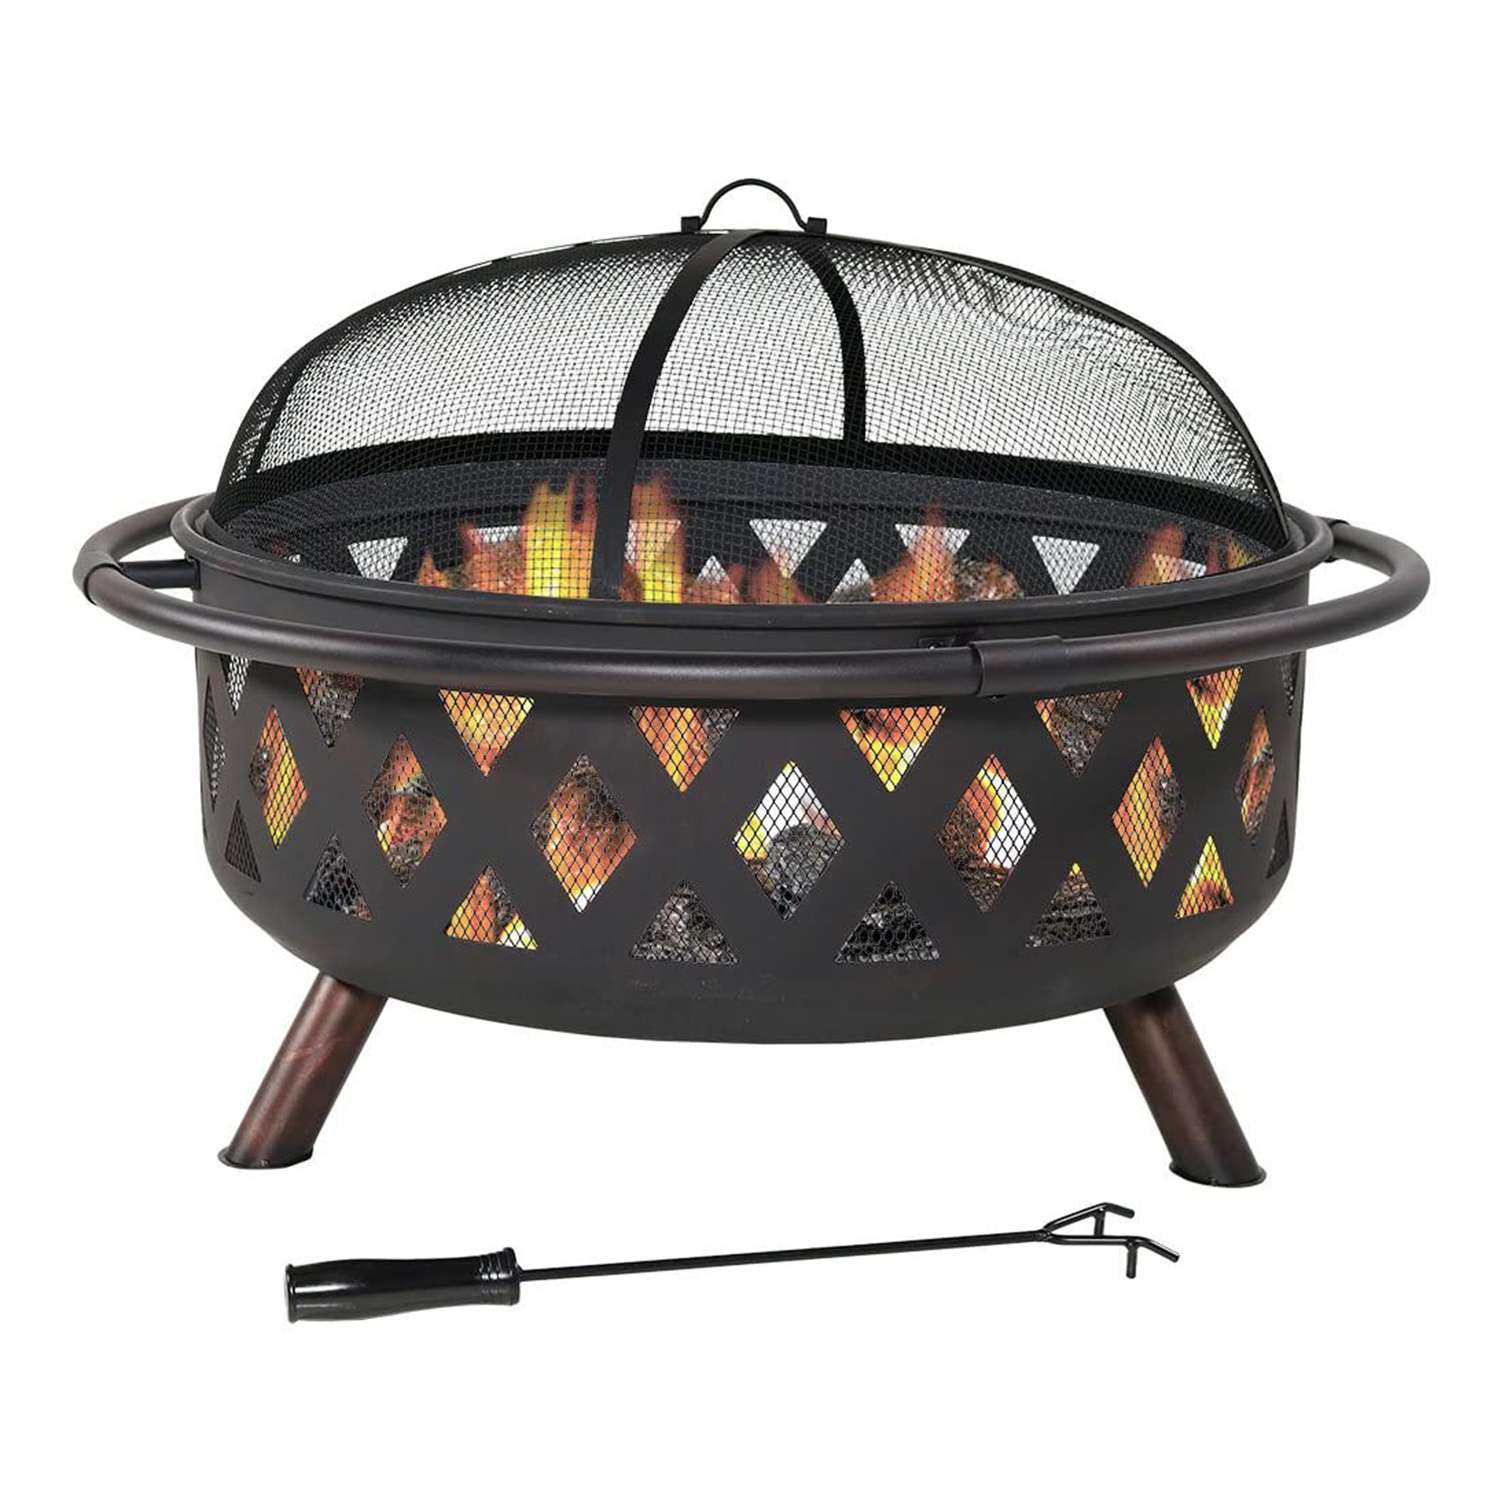 Outdoor Fire Pit on Amazon